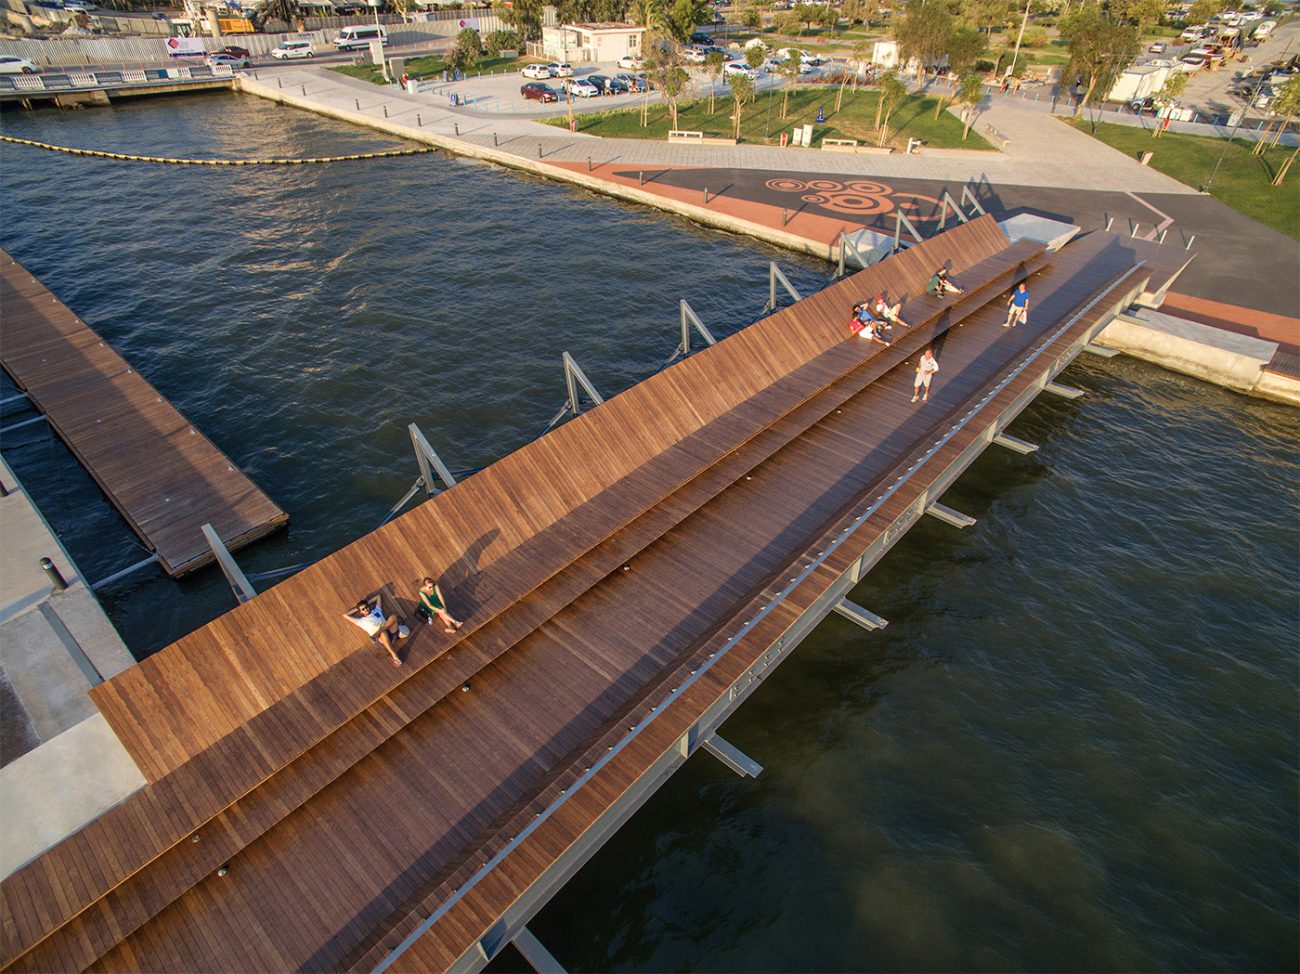 Wooden bridge with space for passage and seating